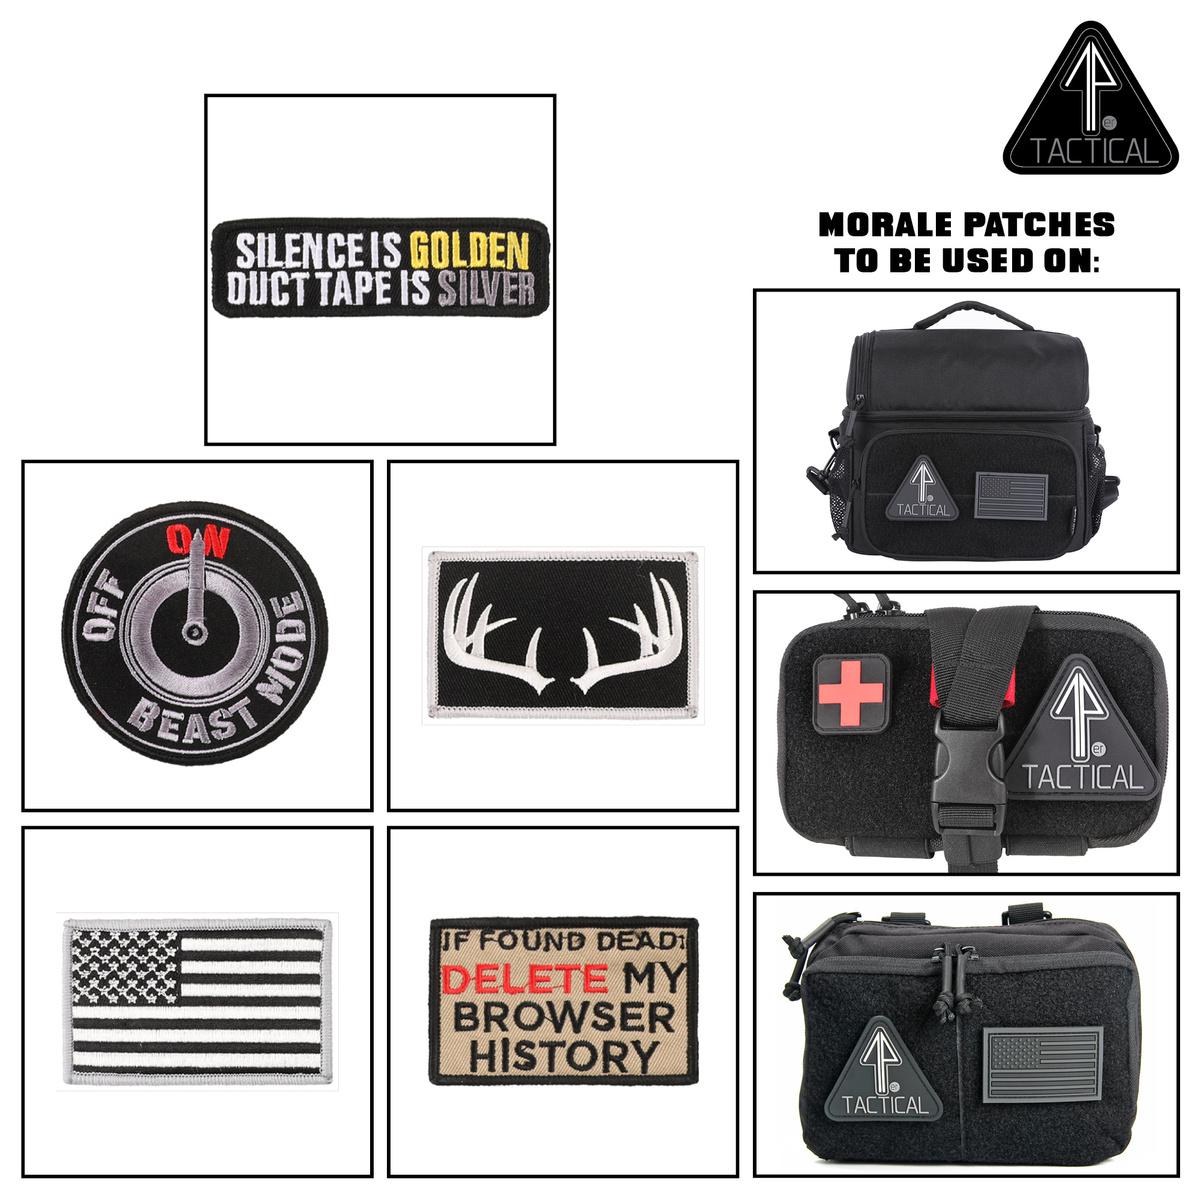 14er Morale Patches can be attached through Velcro to a 14er Tactical Lunch Bag, IFAK, or Admin Pouch.